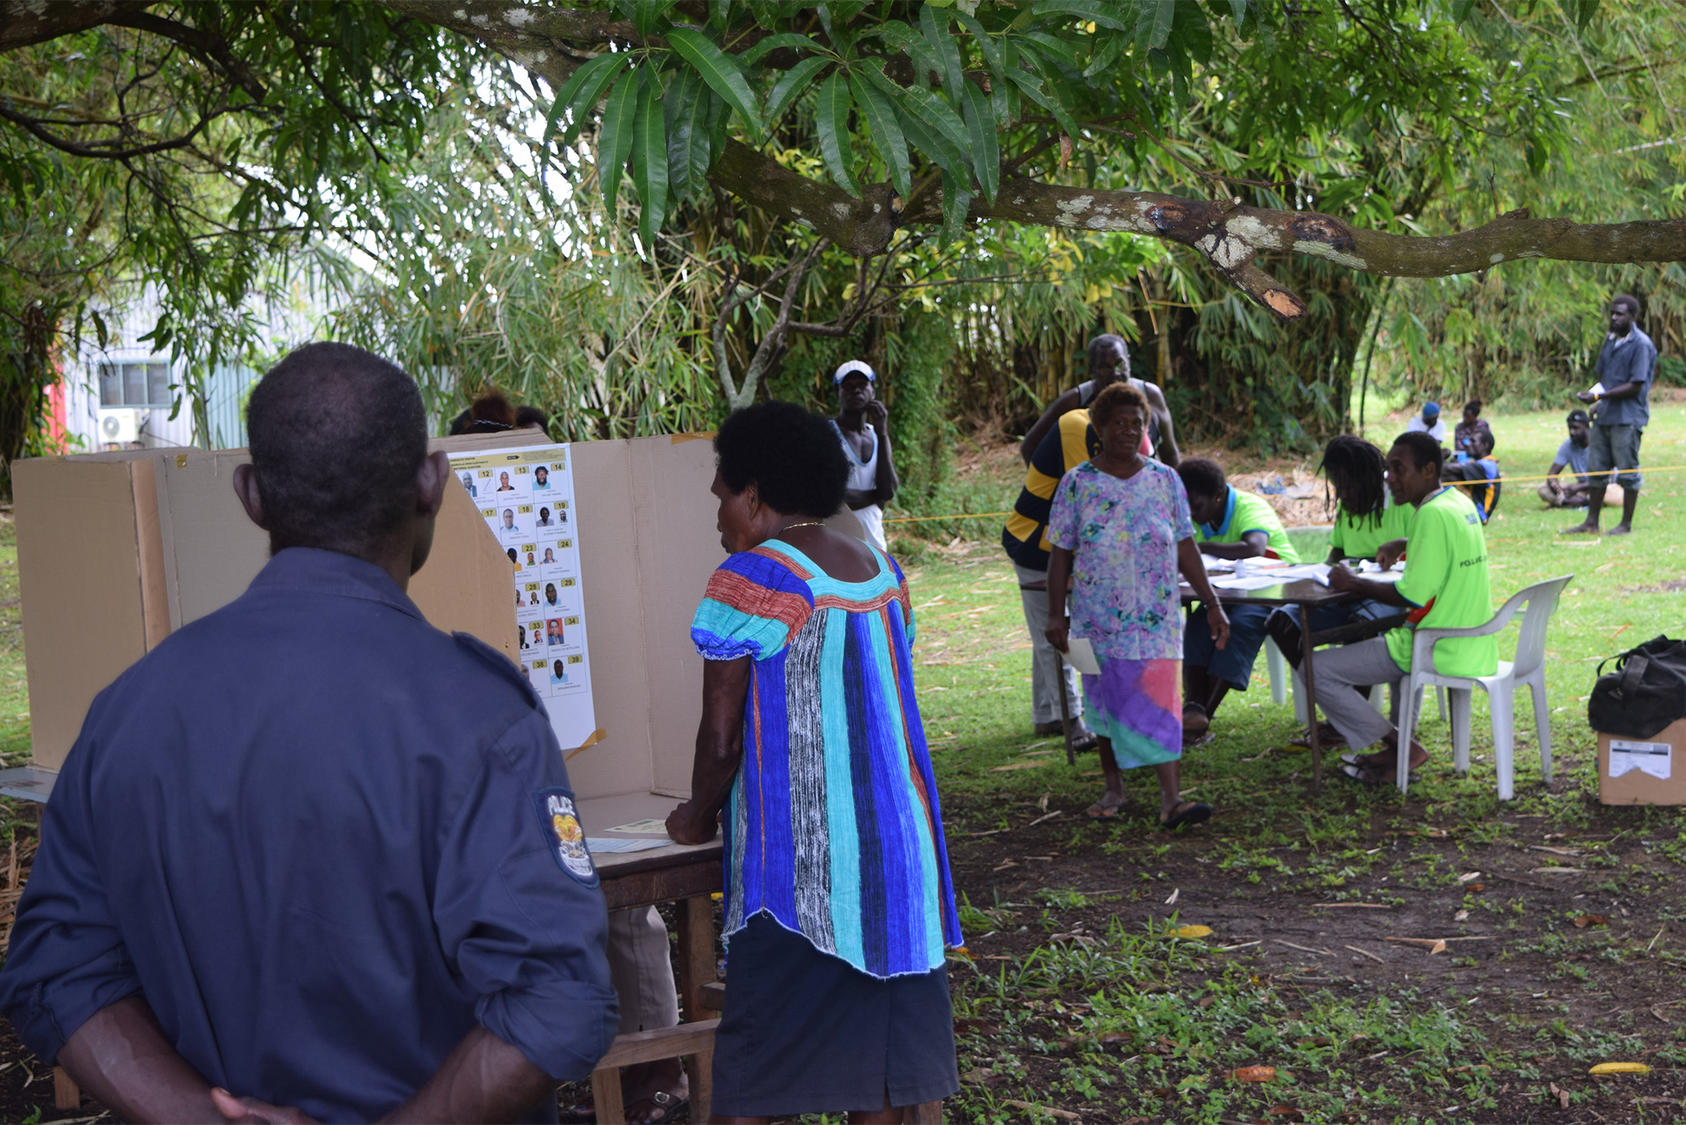 Bougainvilleans vote in Papua New Guinea’s 2017 general elections. In 2019, 97.7% of Bougainvilleans chose independence from Papua New Guinea in a nonbinding referendum. (Commonwealth Secretariat)]